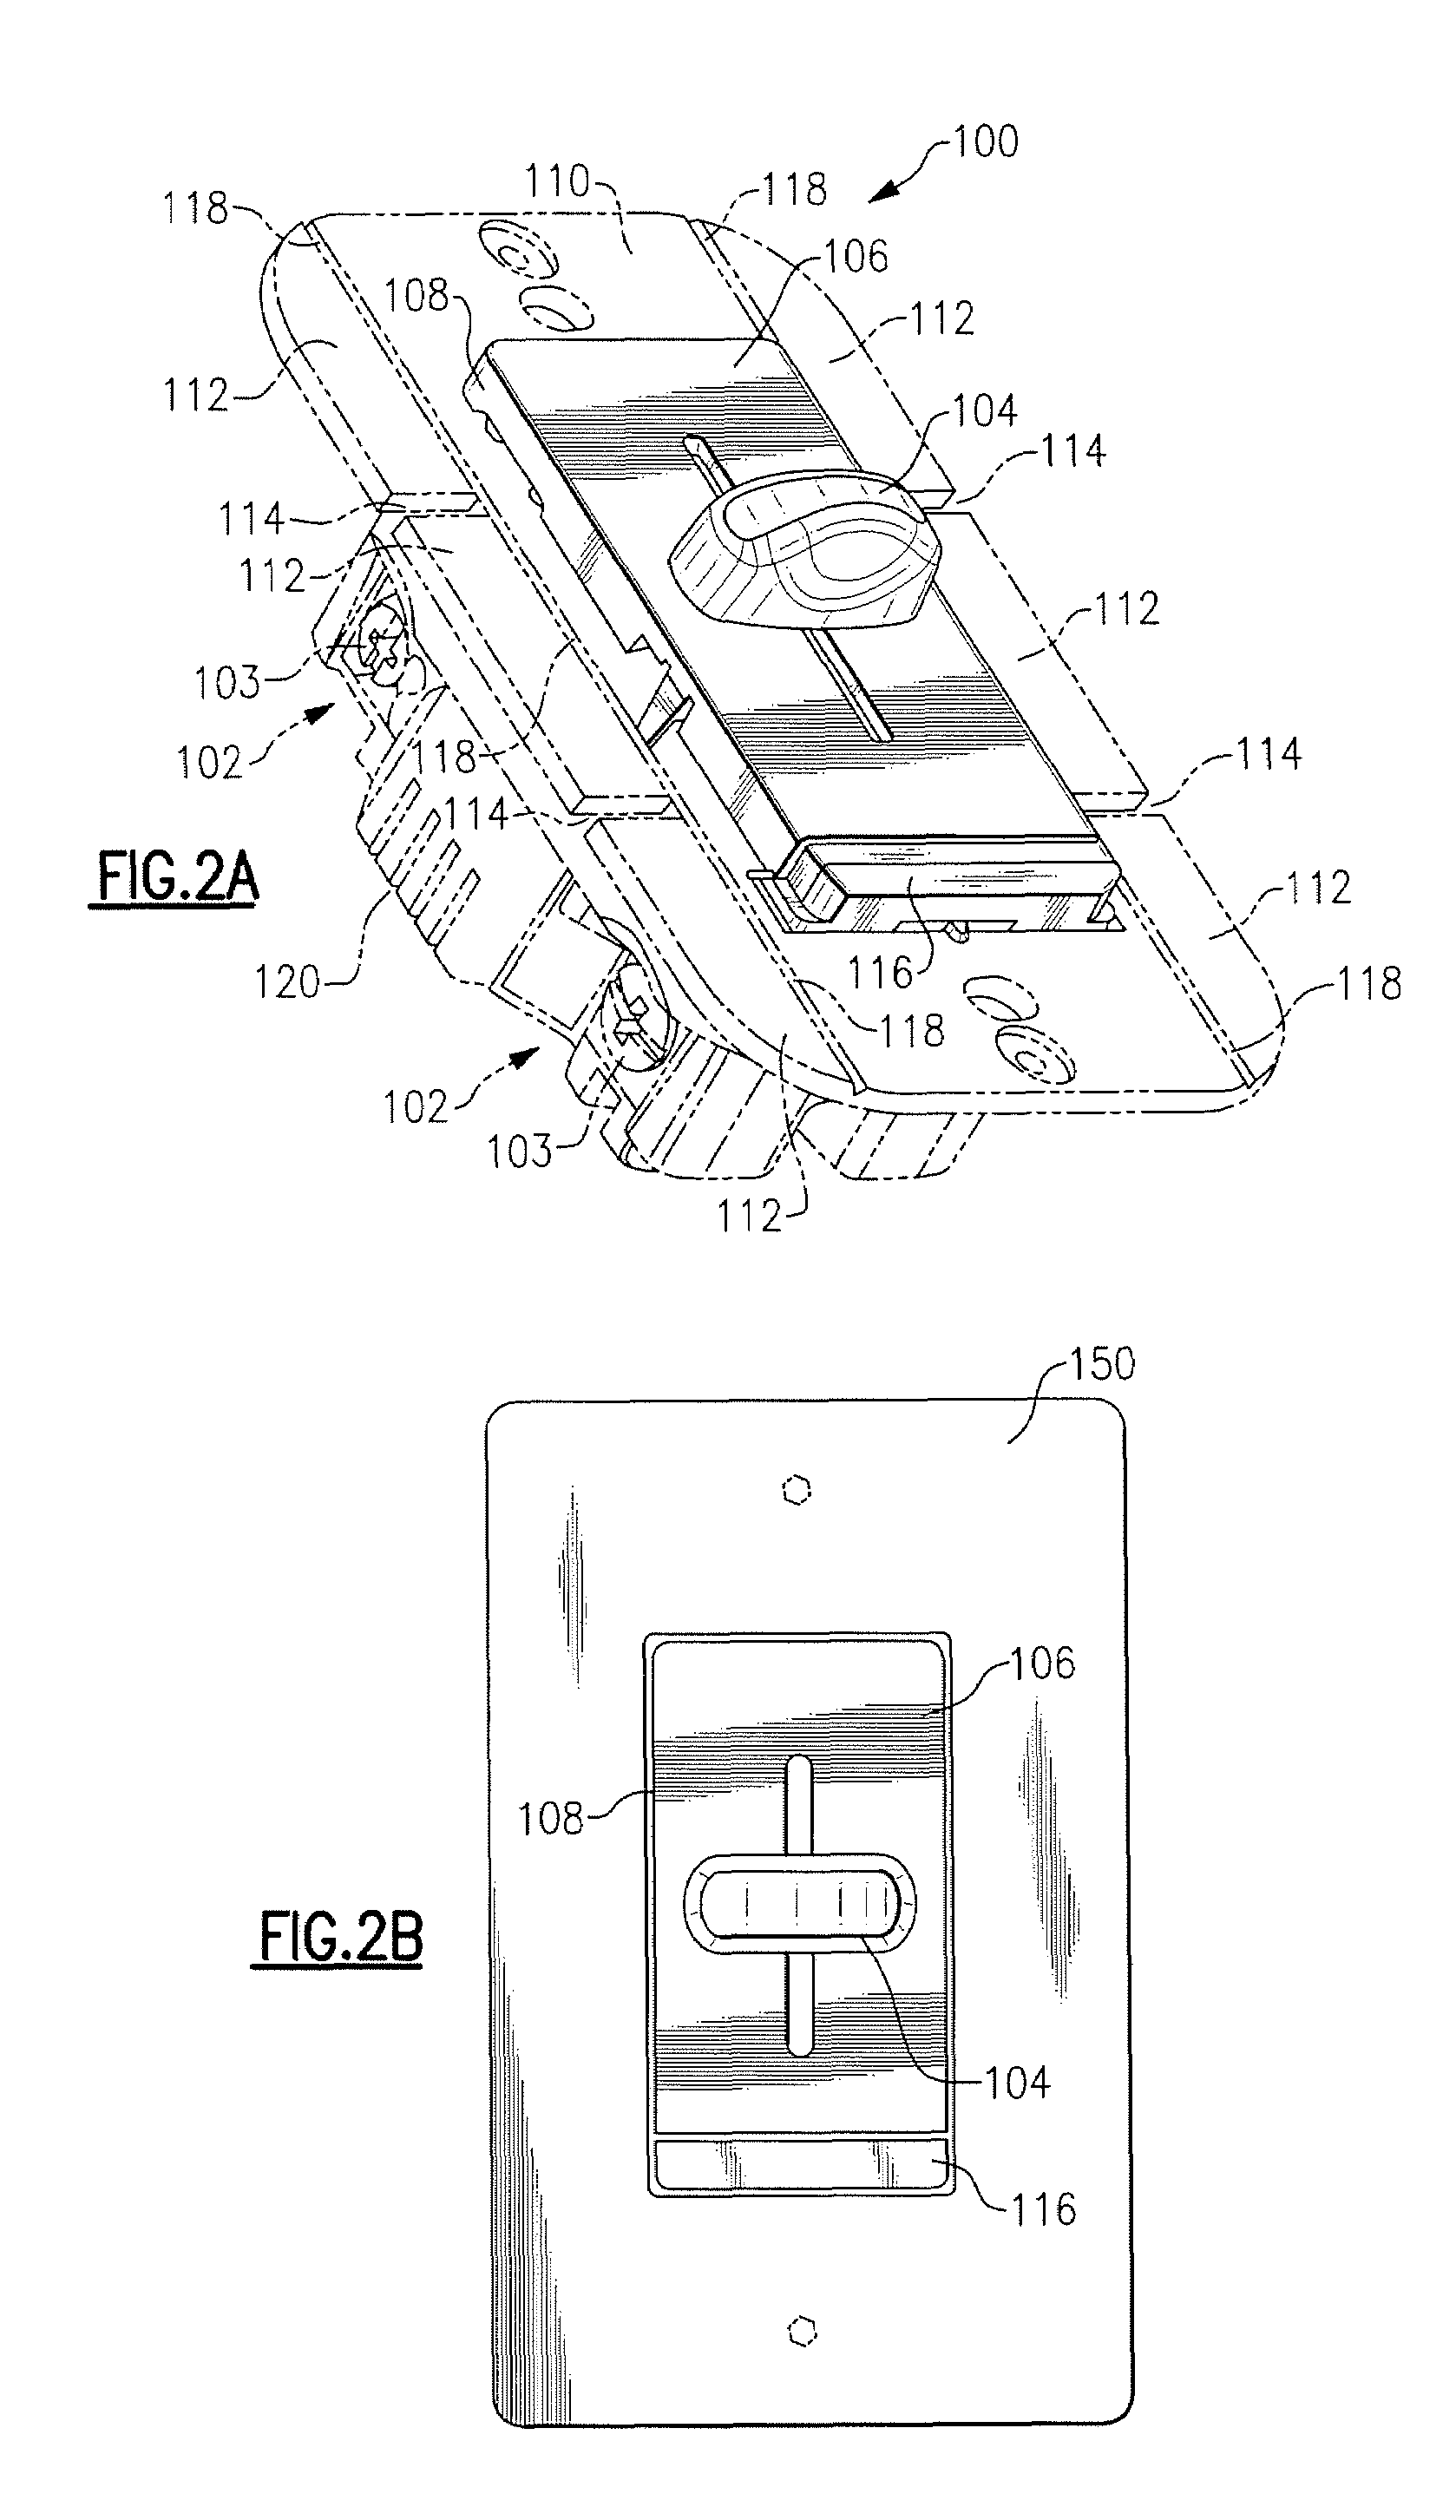 Power control device for an electrical load